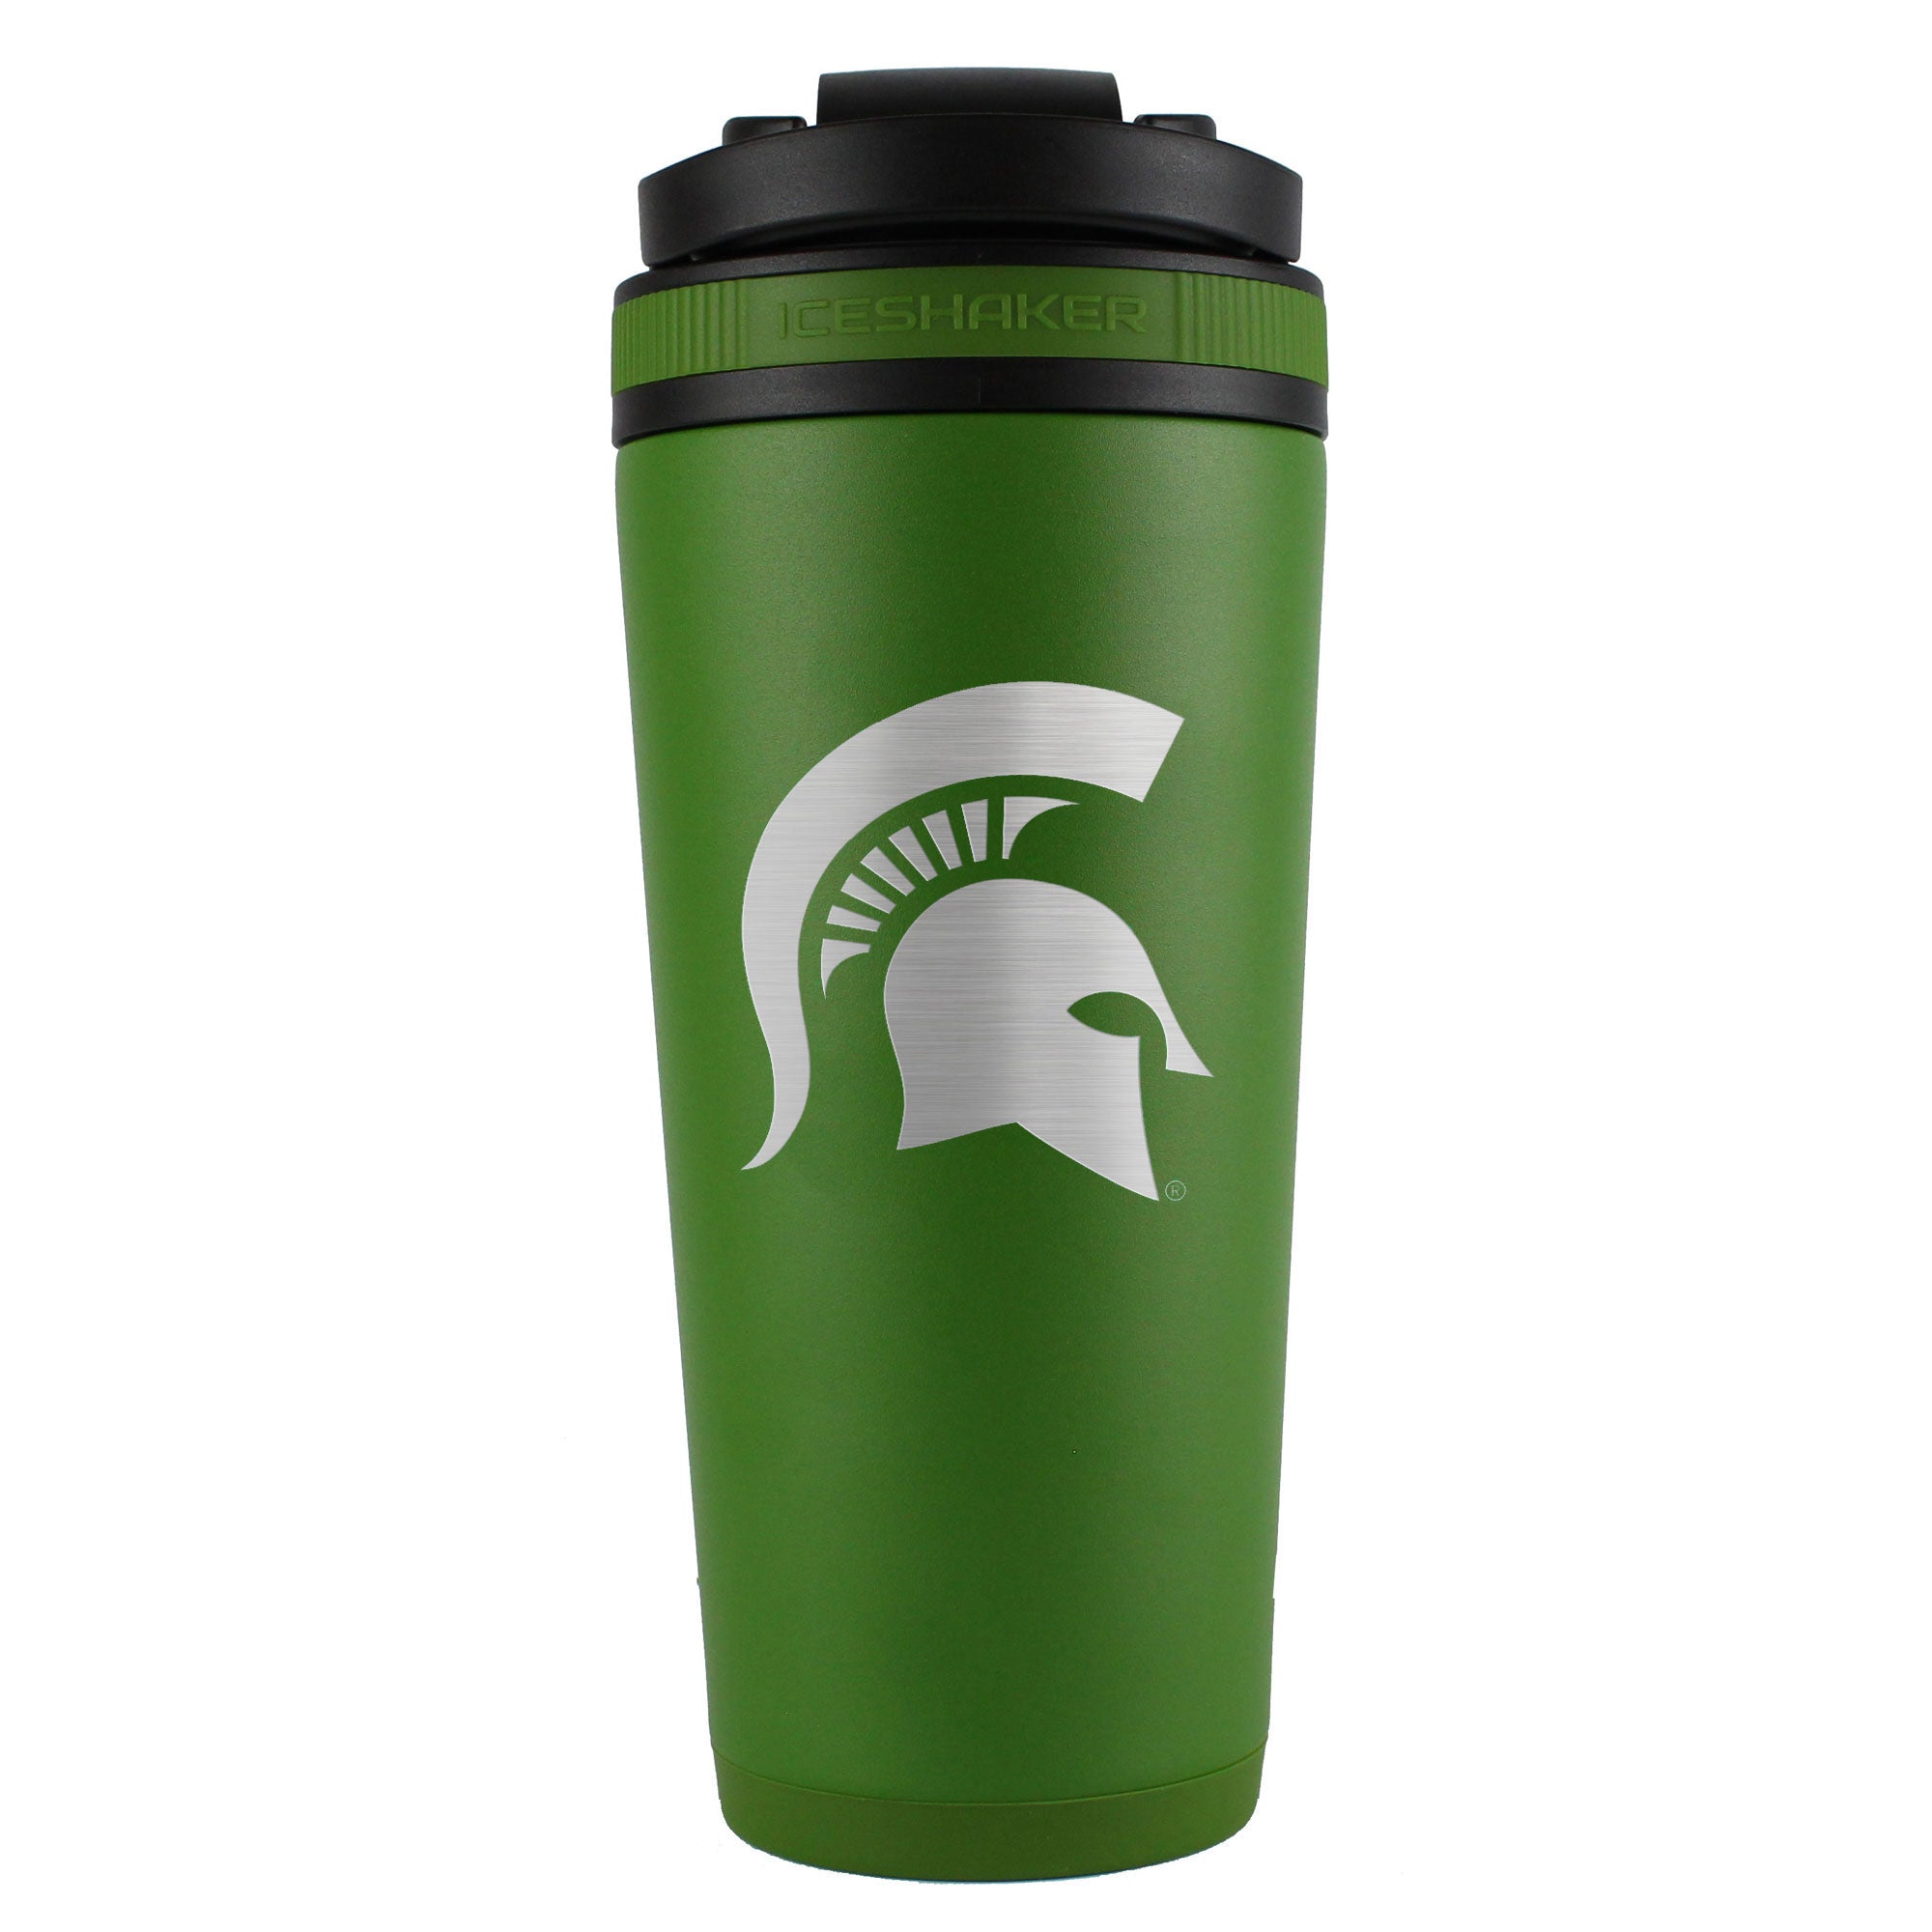 Officially Licensed Michigan State 26oz Ice Shaker